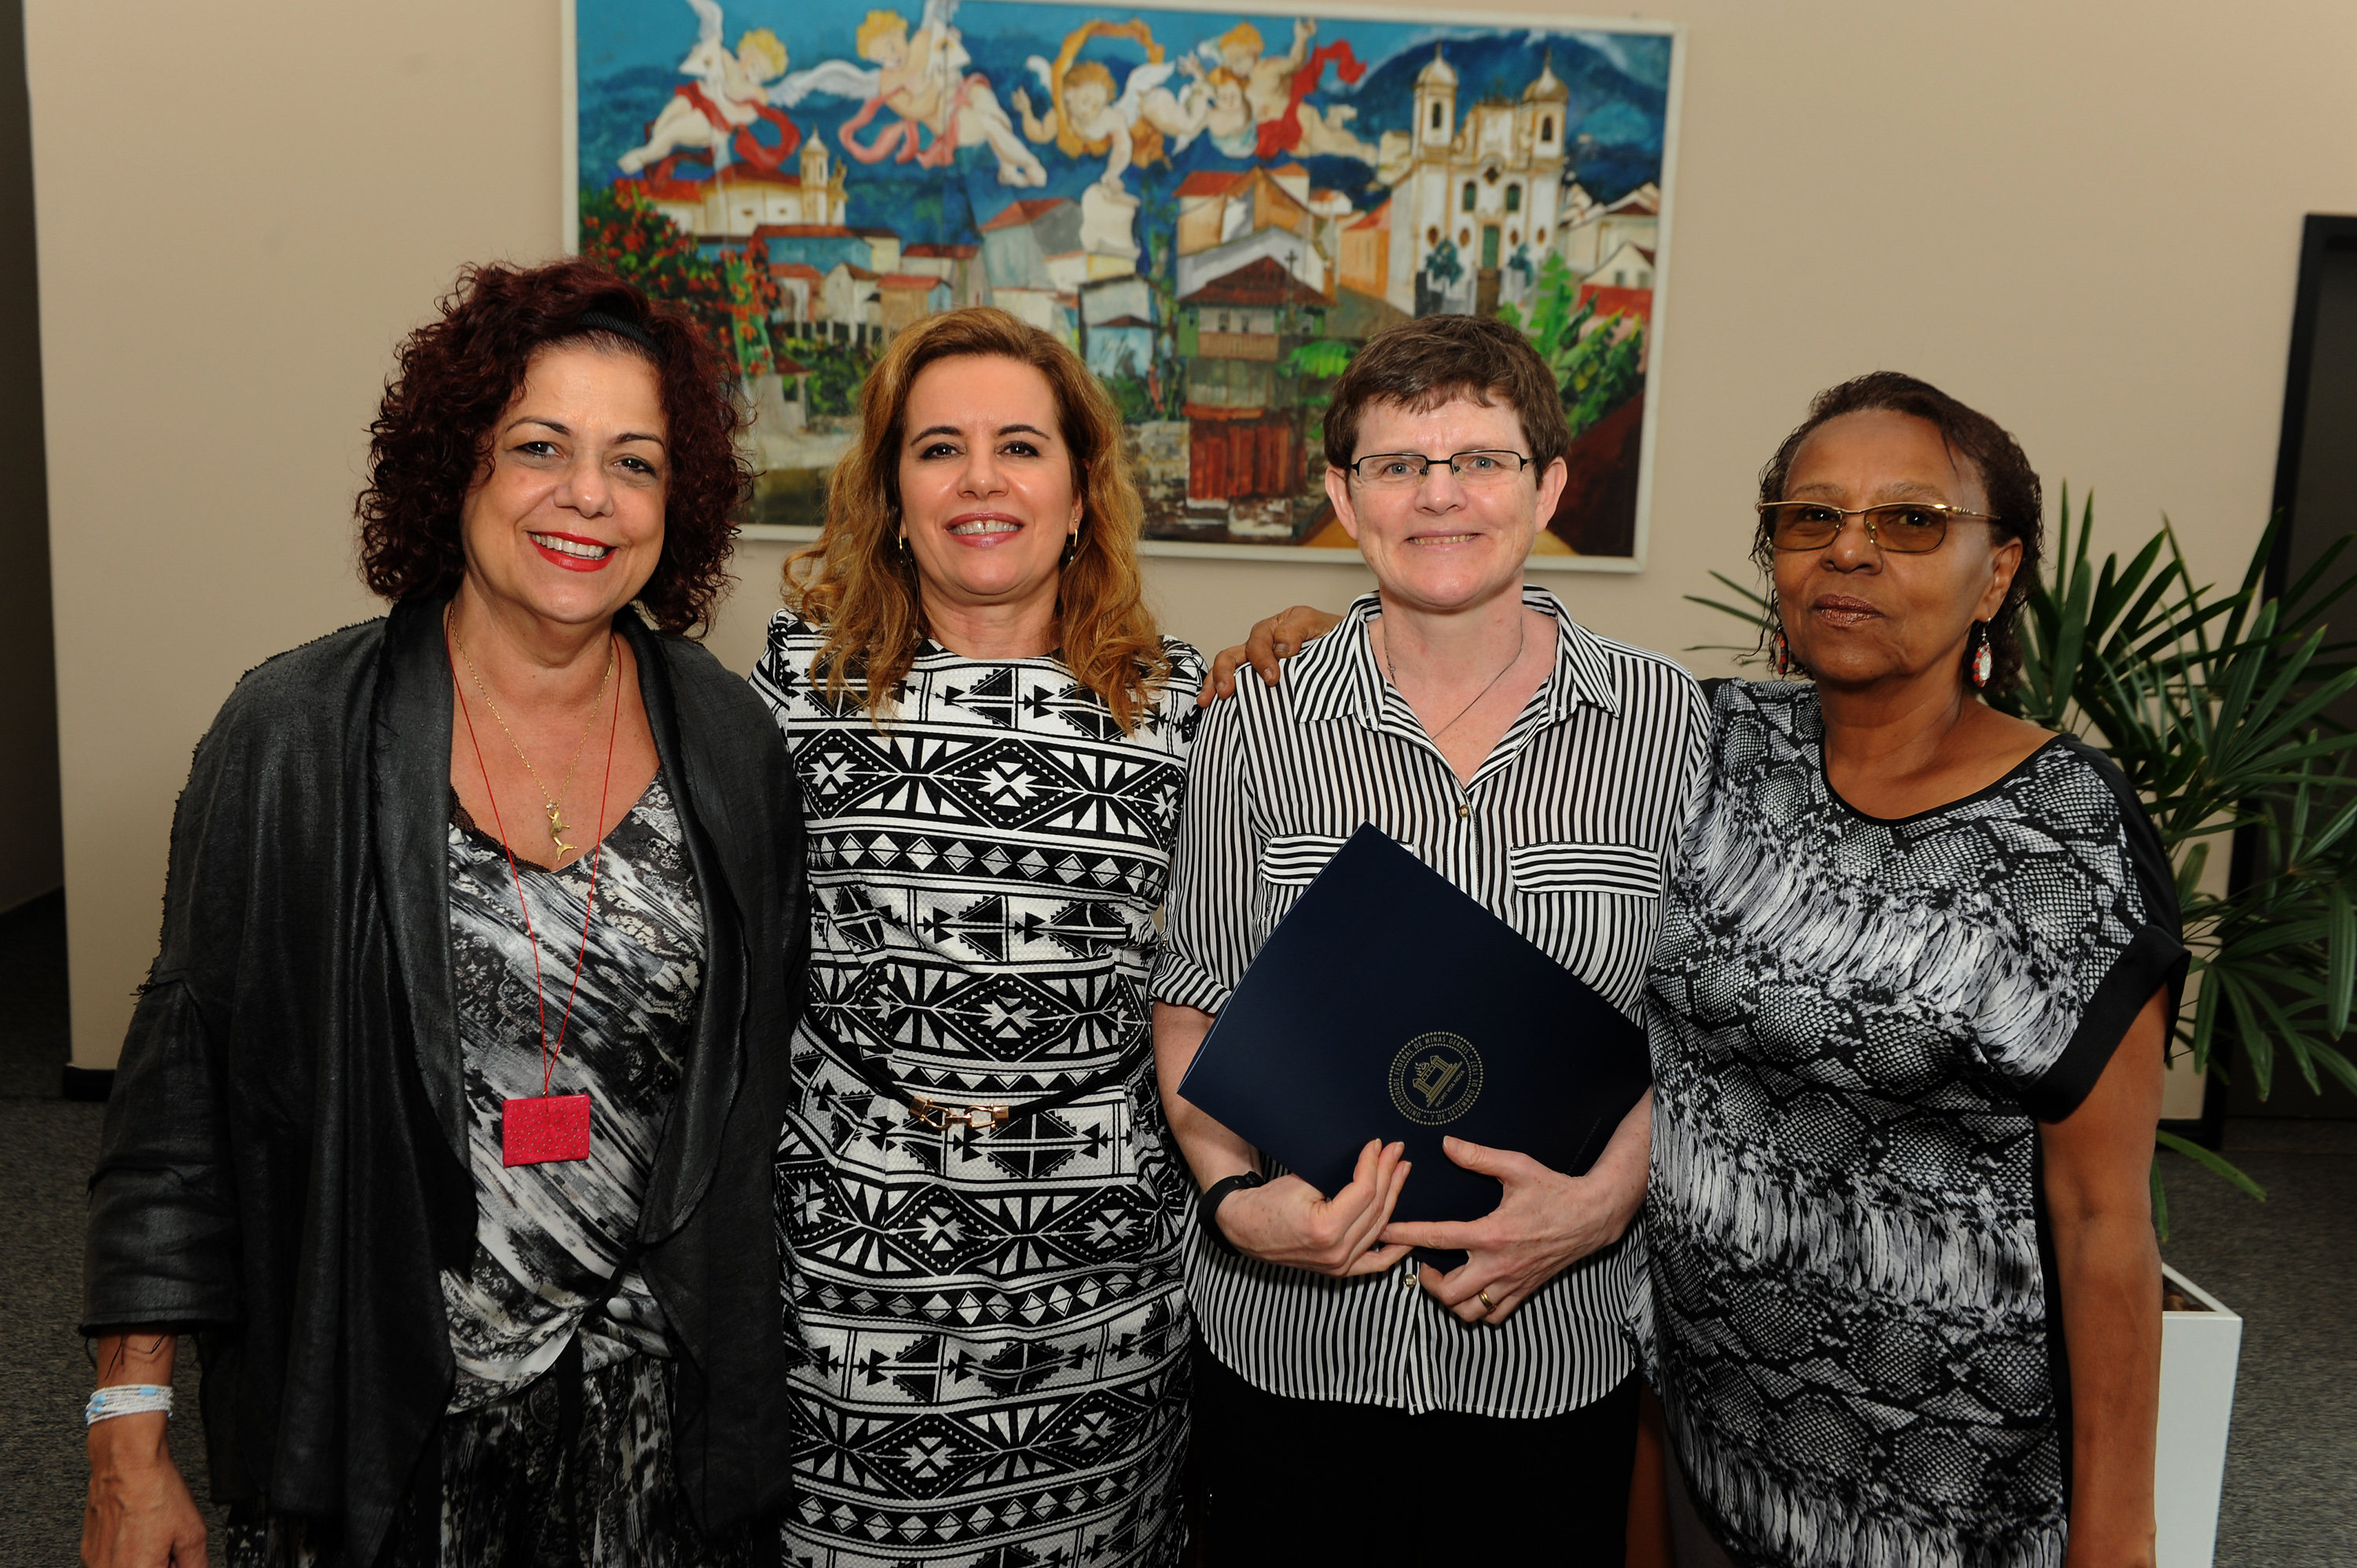 From left: Lucia Castello Branco, Professor at the literary faculty of UFMG, Vice Rector Sandra Goulart Almeida of the Universidade Federal de Minas Gerais (UFMG), Elisabeth Dyvik, Programme Director ICORN, and Leda Maria Martins, Director of Cultural Actions at the UFMG. Photo.